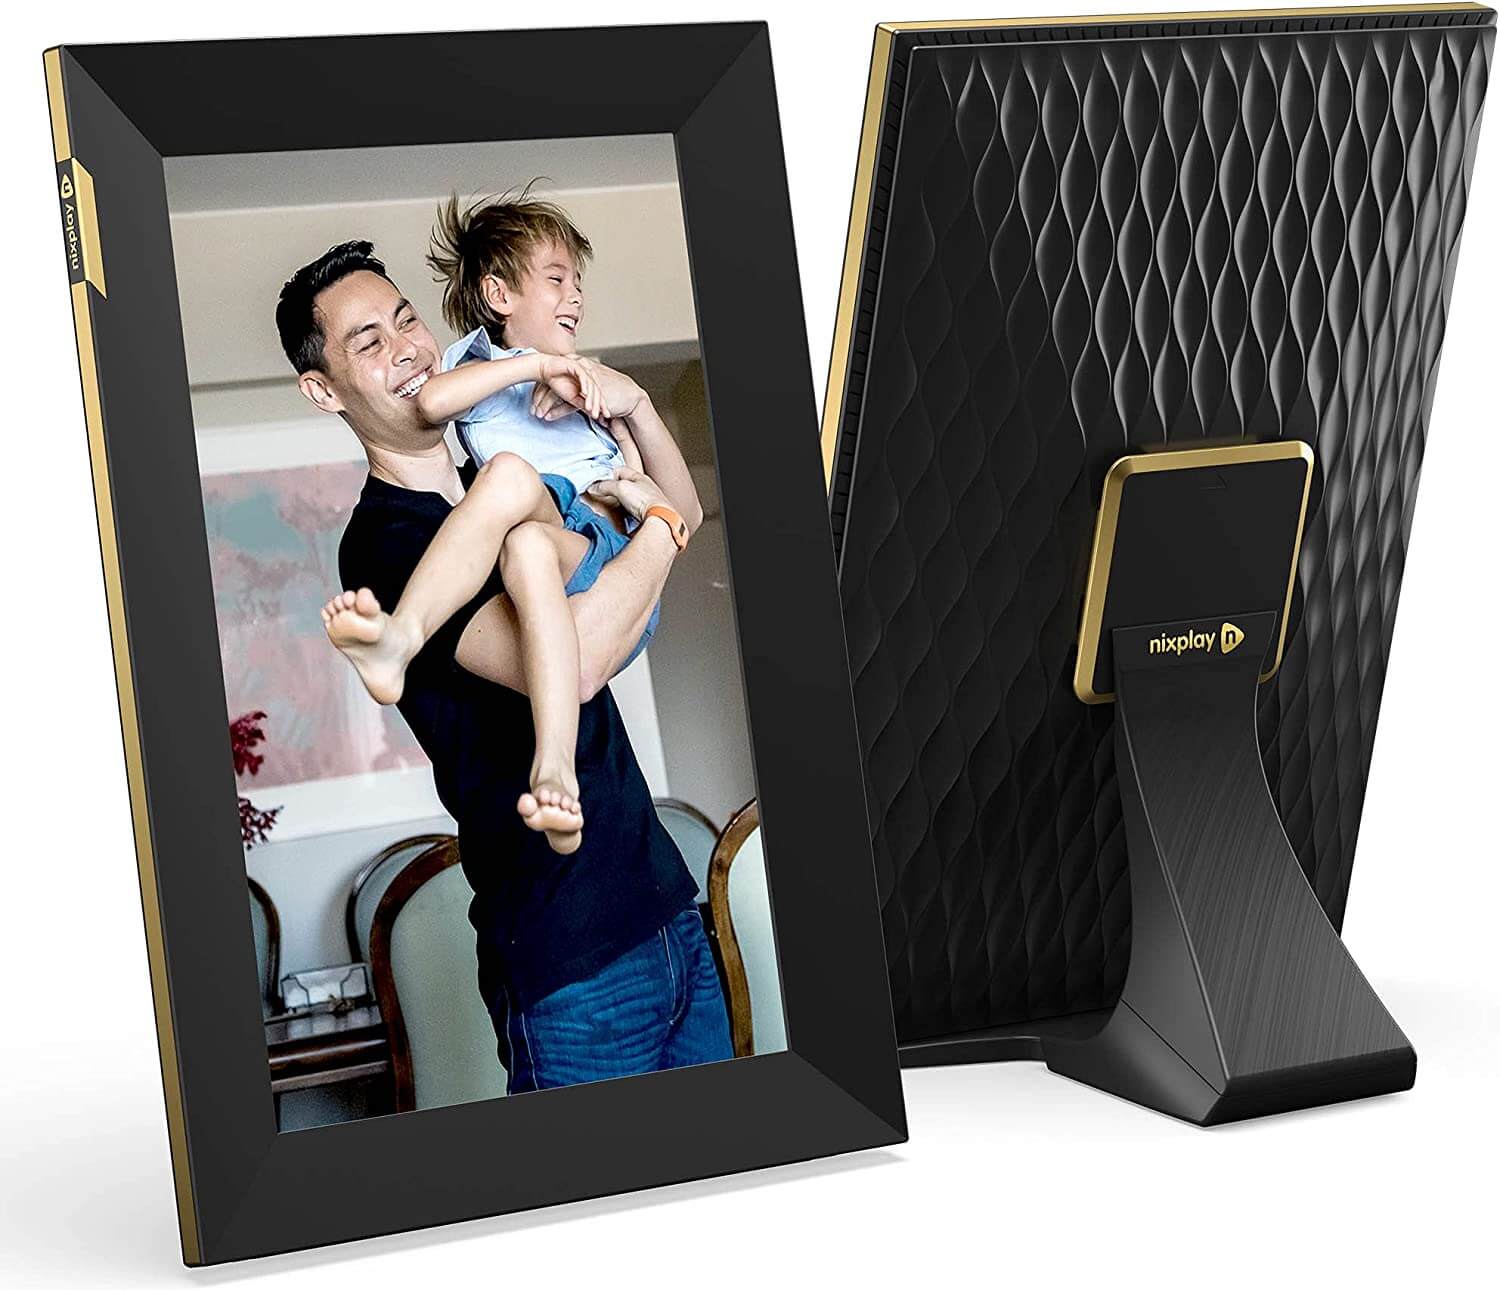 black and gold digital picture frame with stand showing father and son